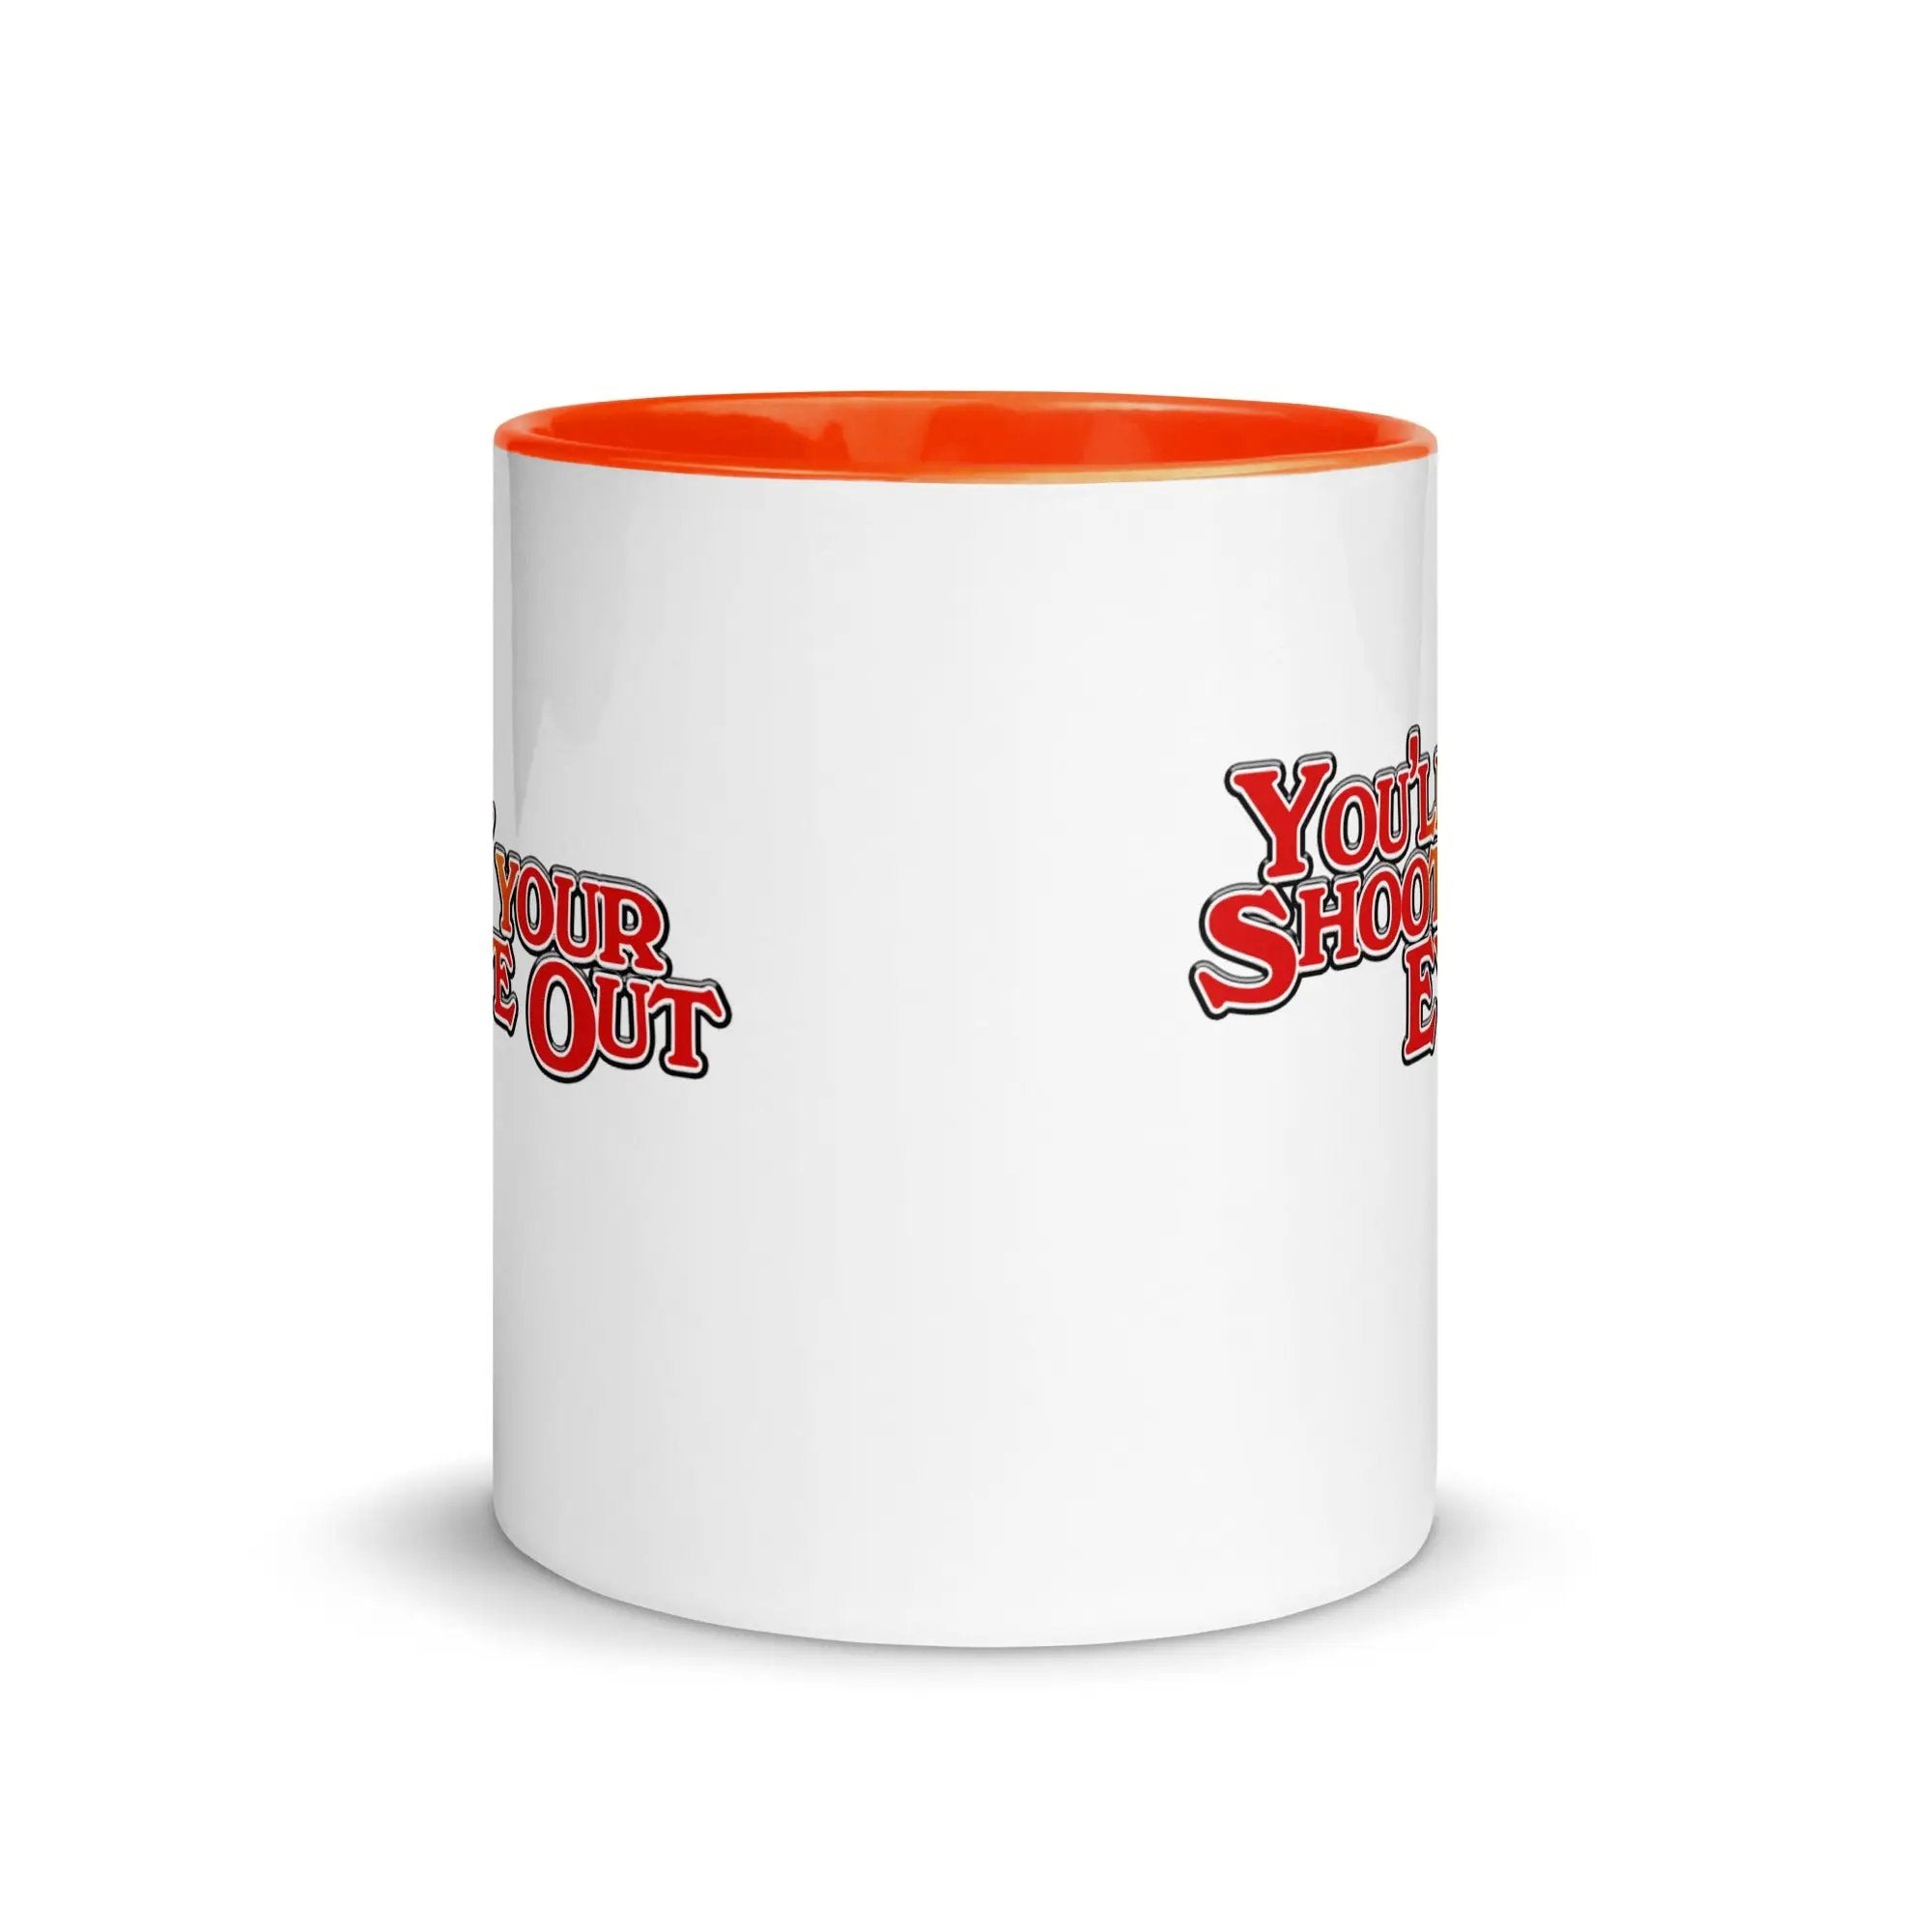 You'll Shoot Your Eye Out Mug with Color Inside